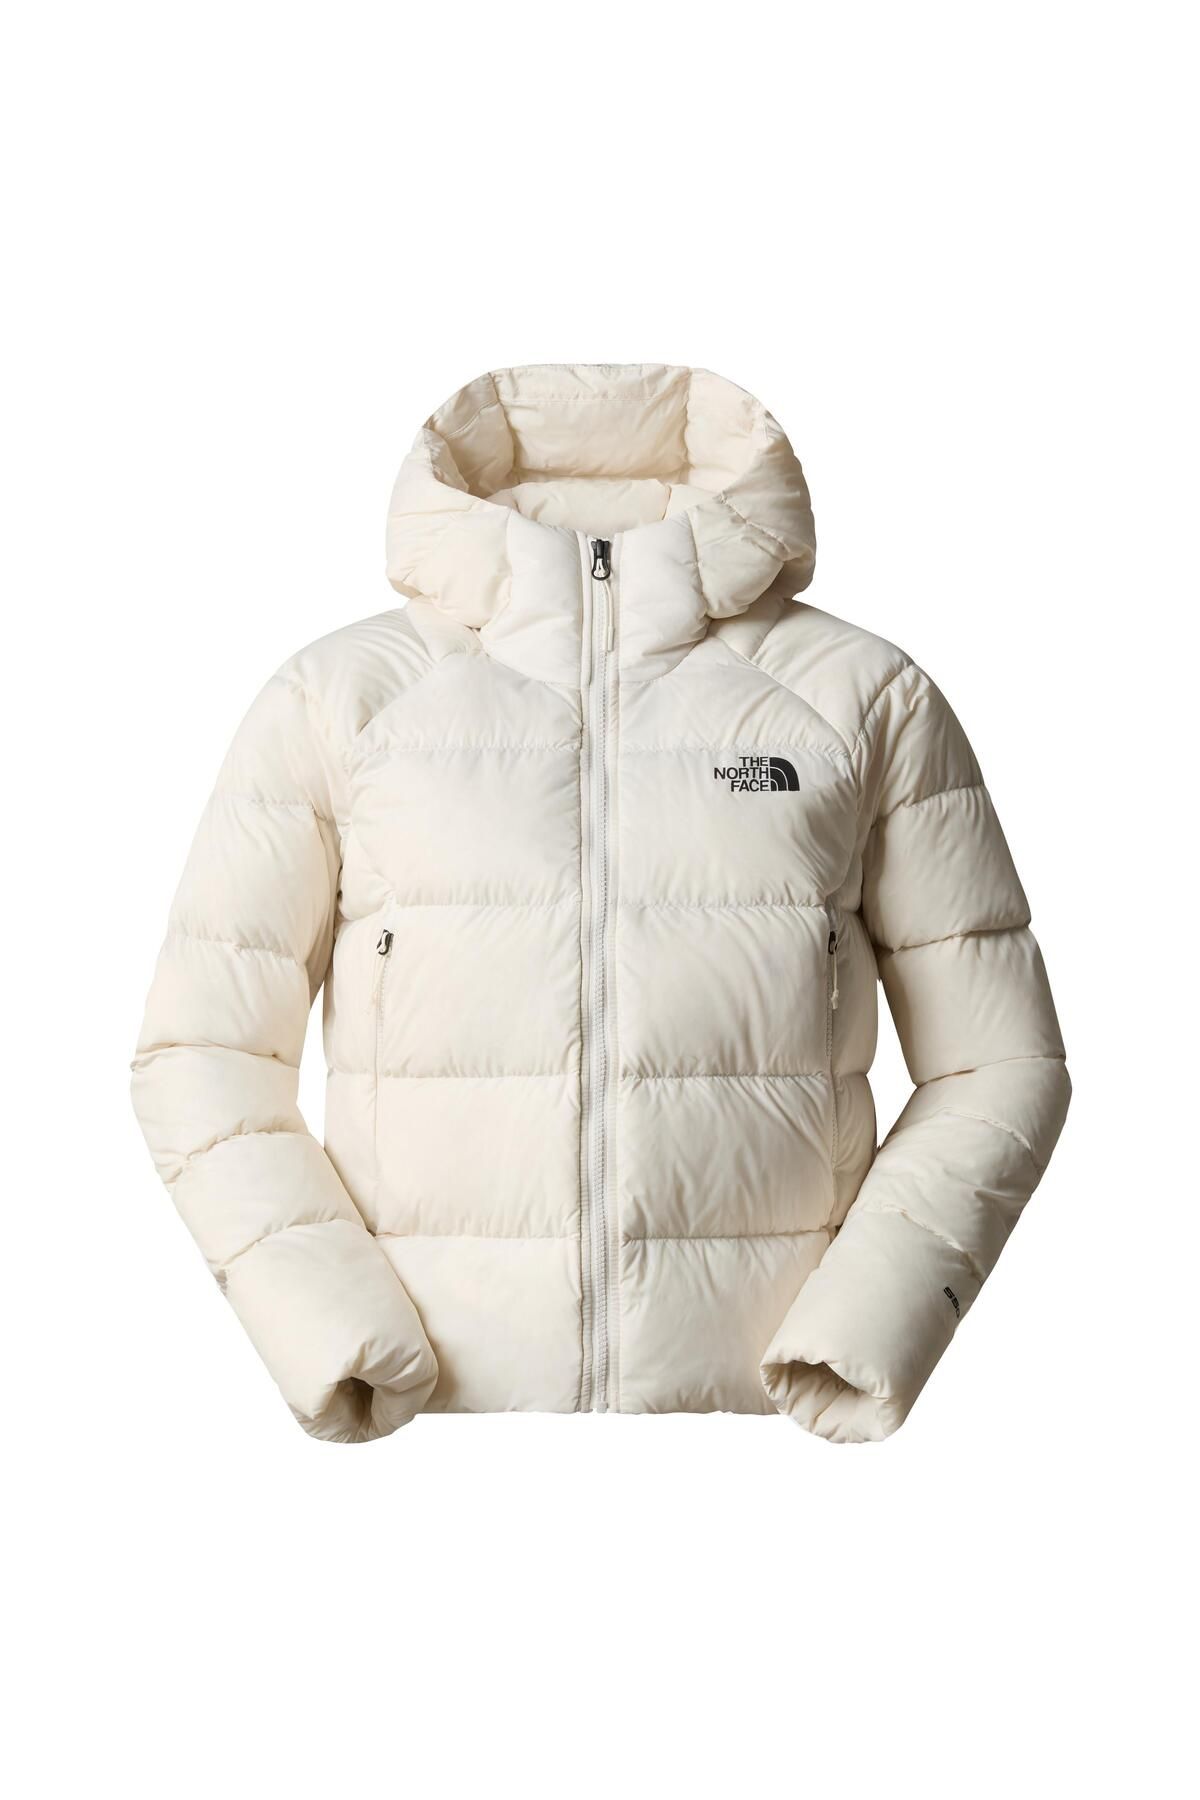 The North Face Hyalite Kadın Mont